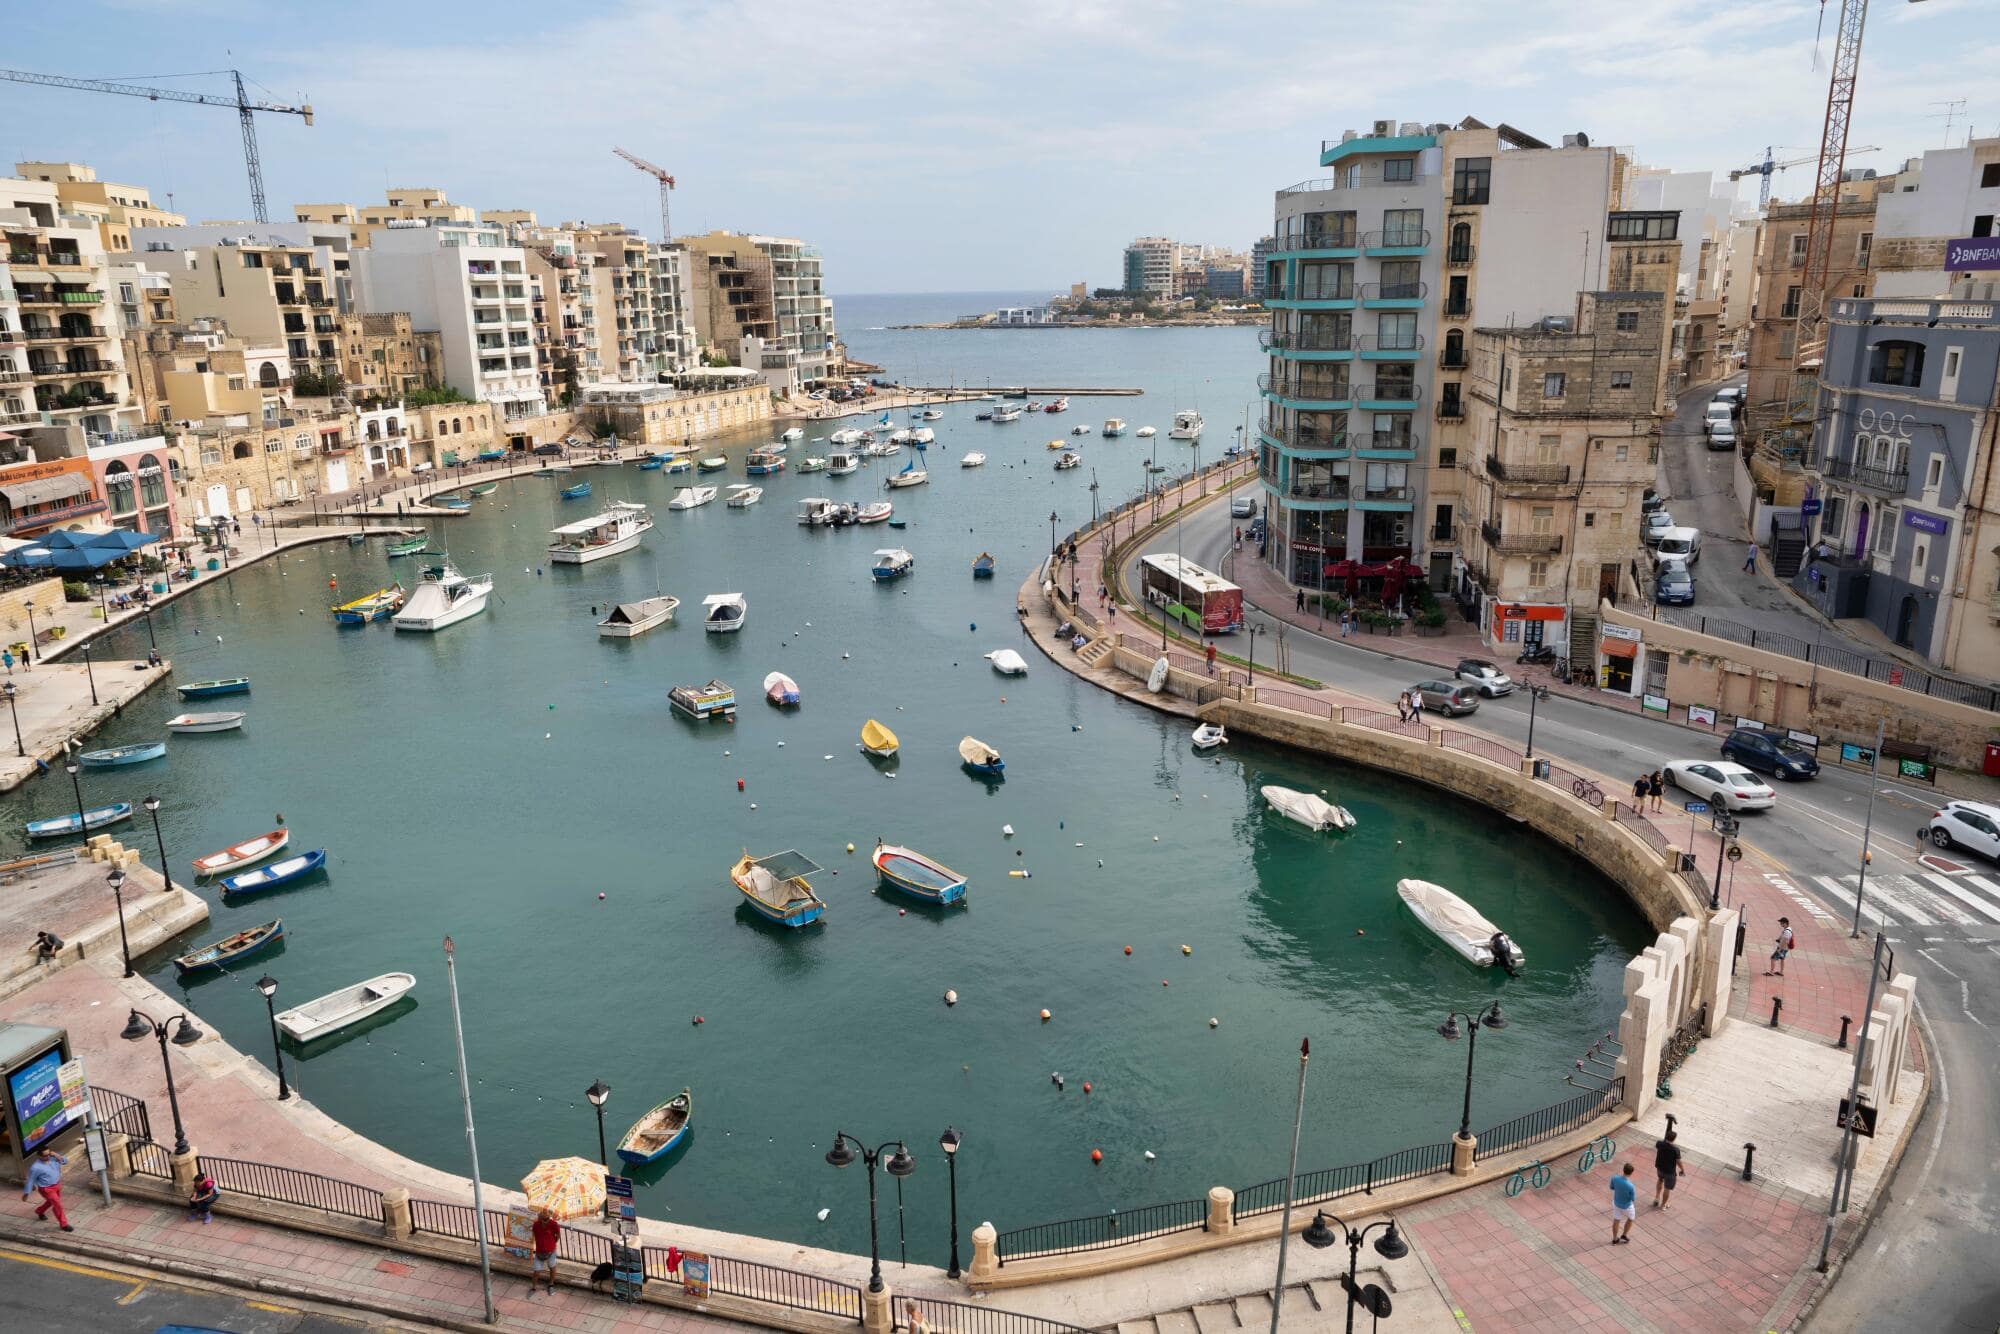 Airbnb Management Services in Msida, Malta: An Overview